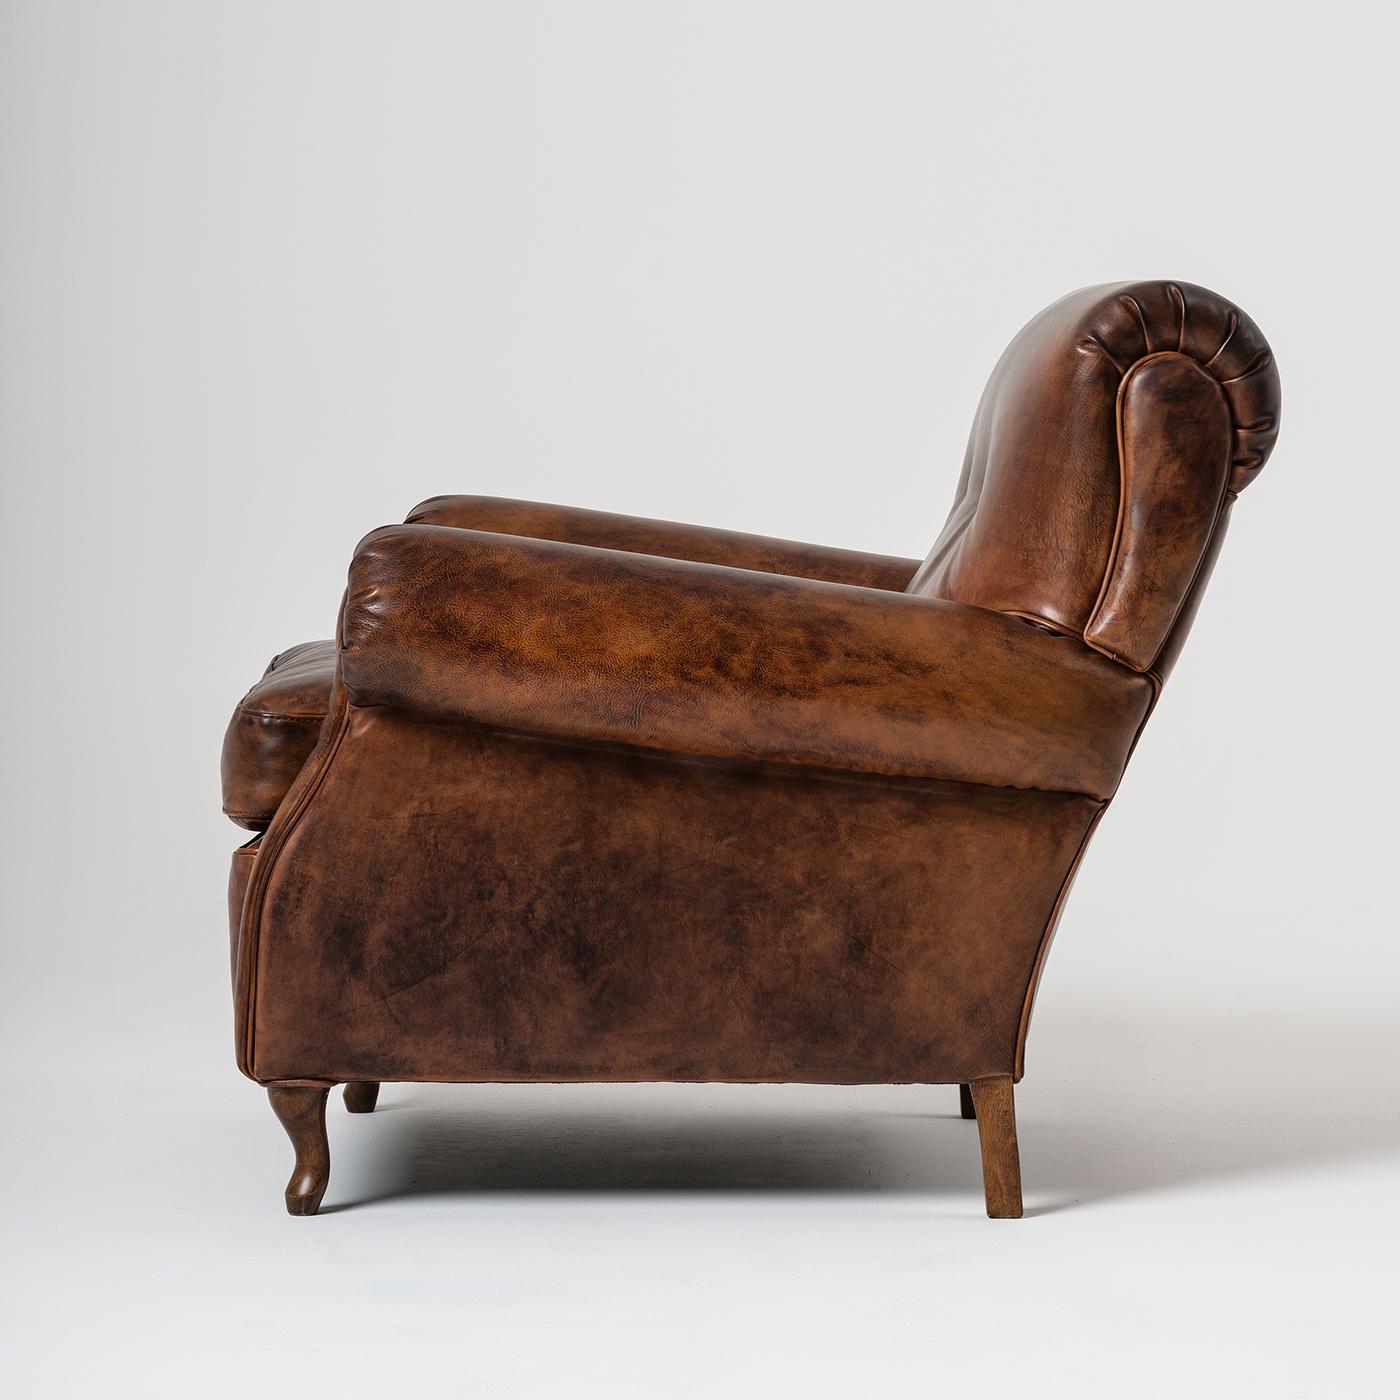 The timeless style of this armchair is suitable for any environment. The timeless shapes, the excellent comfort and the beauty of the materials make this object unique in its kind. The hand-finished natural crust leather finish and the